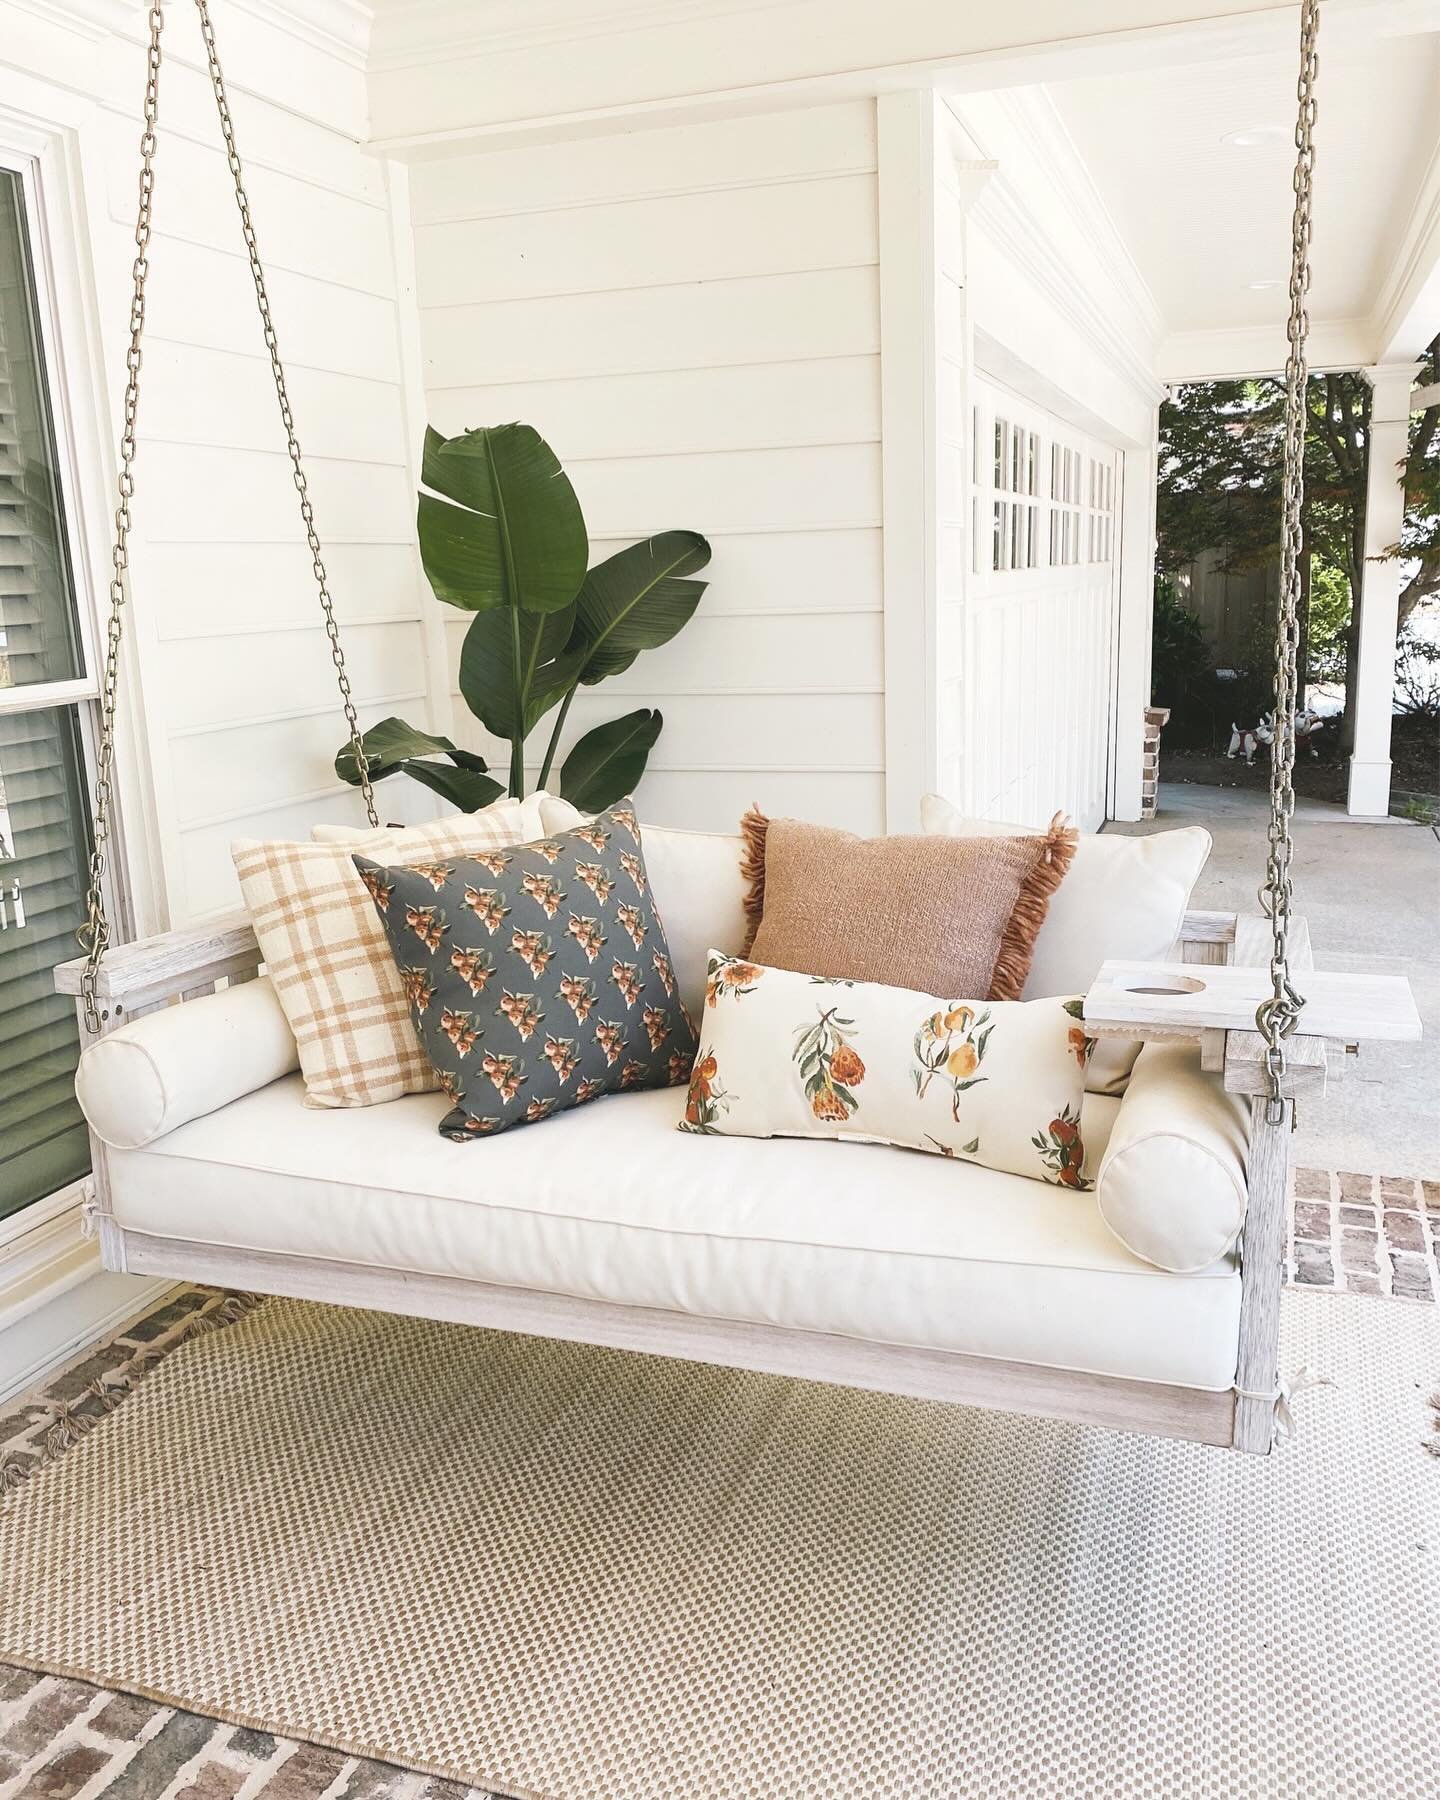 It&rsquo;s Spring time and the front porch is calling 📣

Are you team rocker or team porch swing? Let us know below👇🏼
- - - - - - - - - -
LIKE and Comment SHOP and I will send you a link to this post! 
- - - - - - - - - -
Front Porch inspiration |